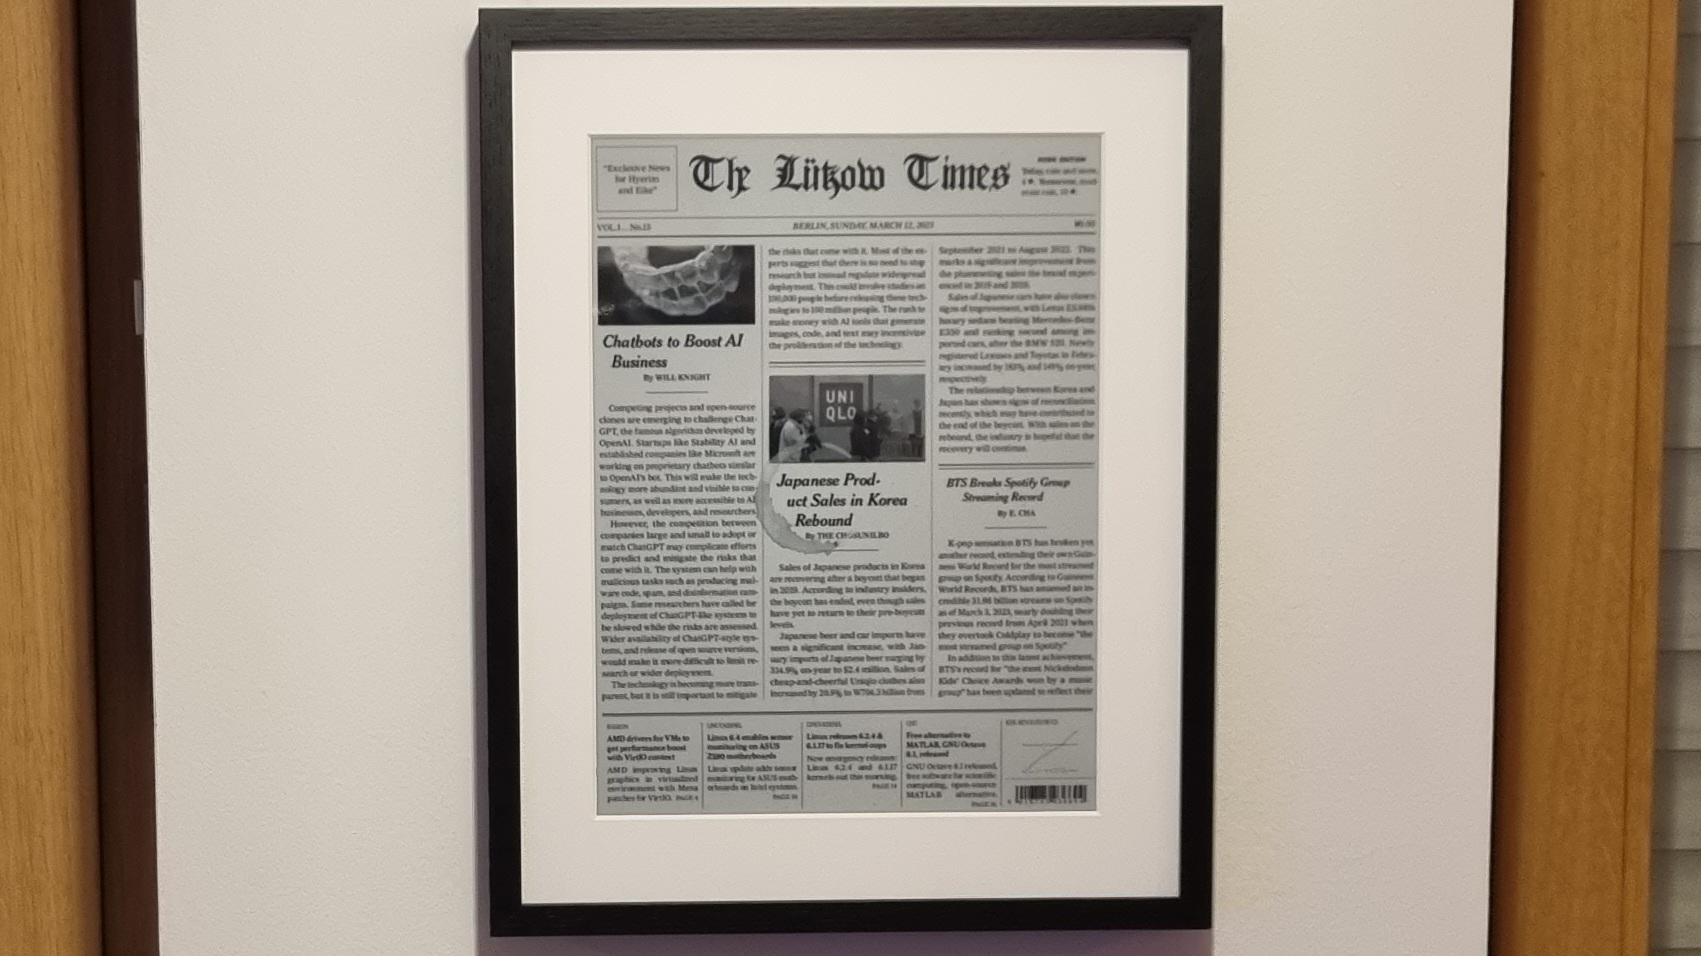 A Wall Mounted Newspaper That’s Extra